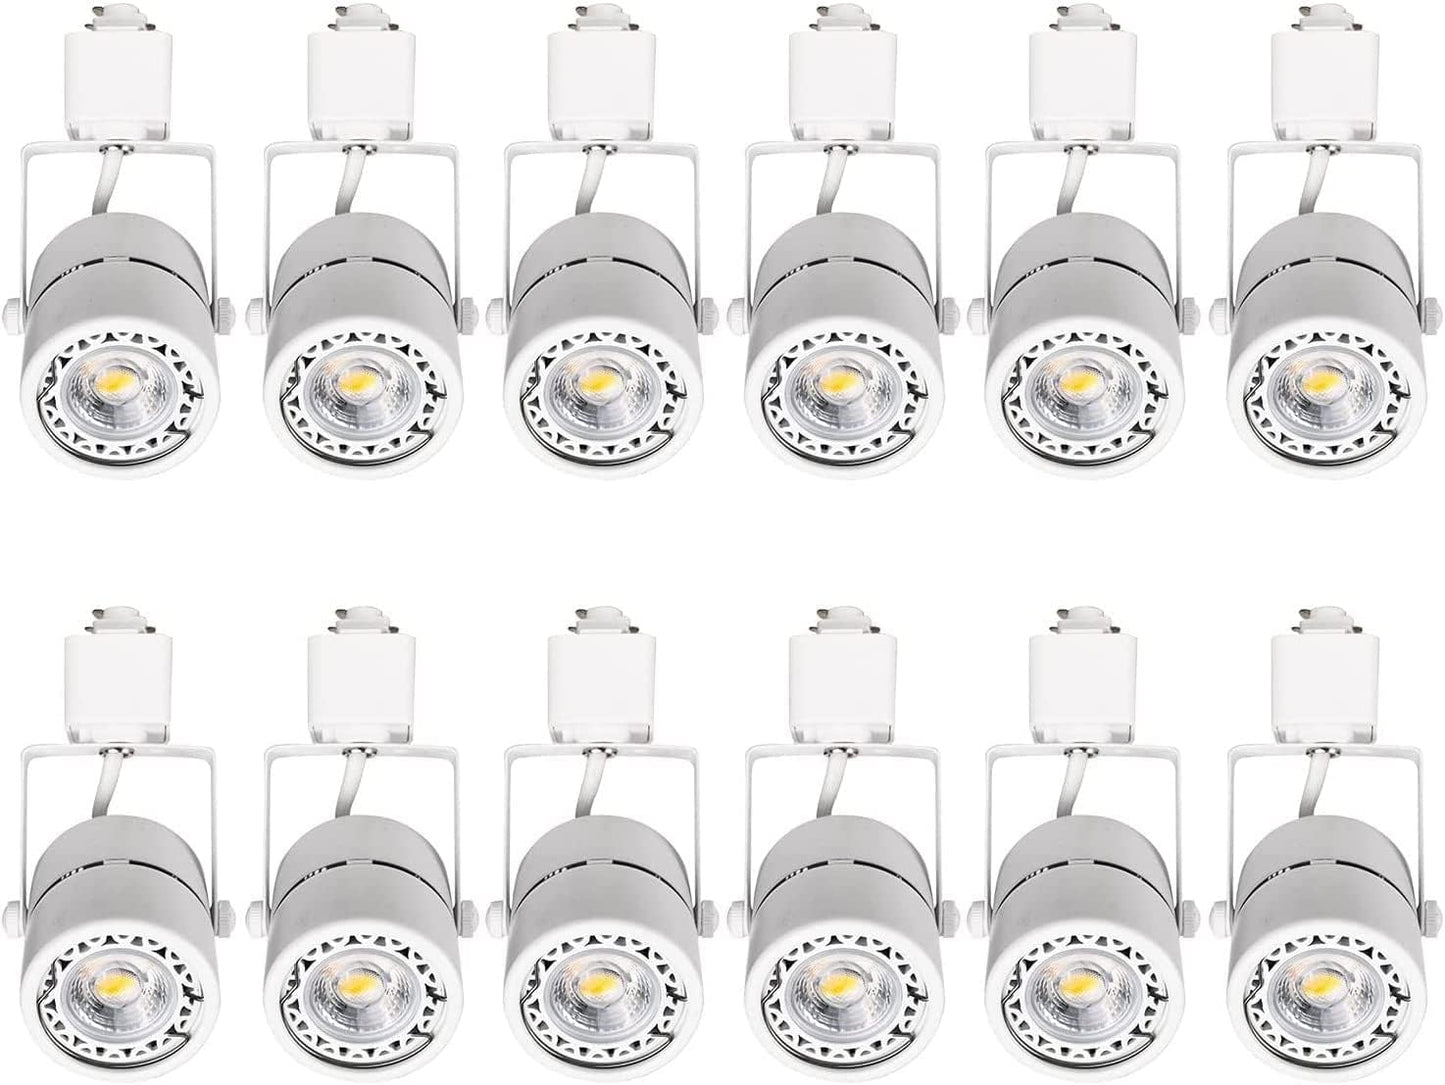 10W H Track Light Heads,Dimmable LED Track Light Fixtures for Accent Retail Artwork, Linear Track Light H Type -4000K Daylight 120V 24 Angle Halo Type CRI90+ 12 Pack (White)